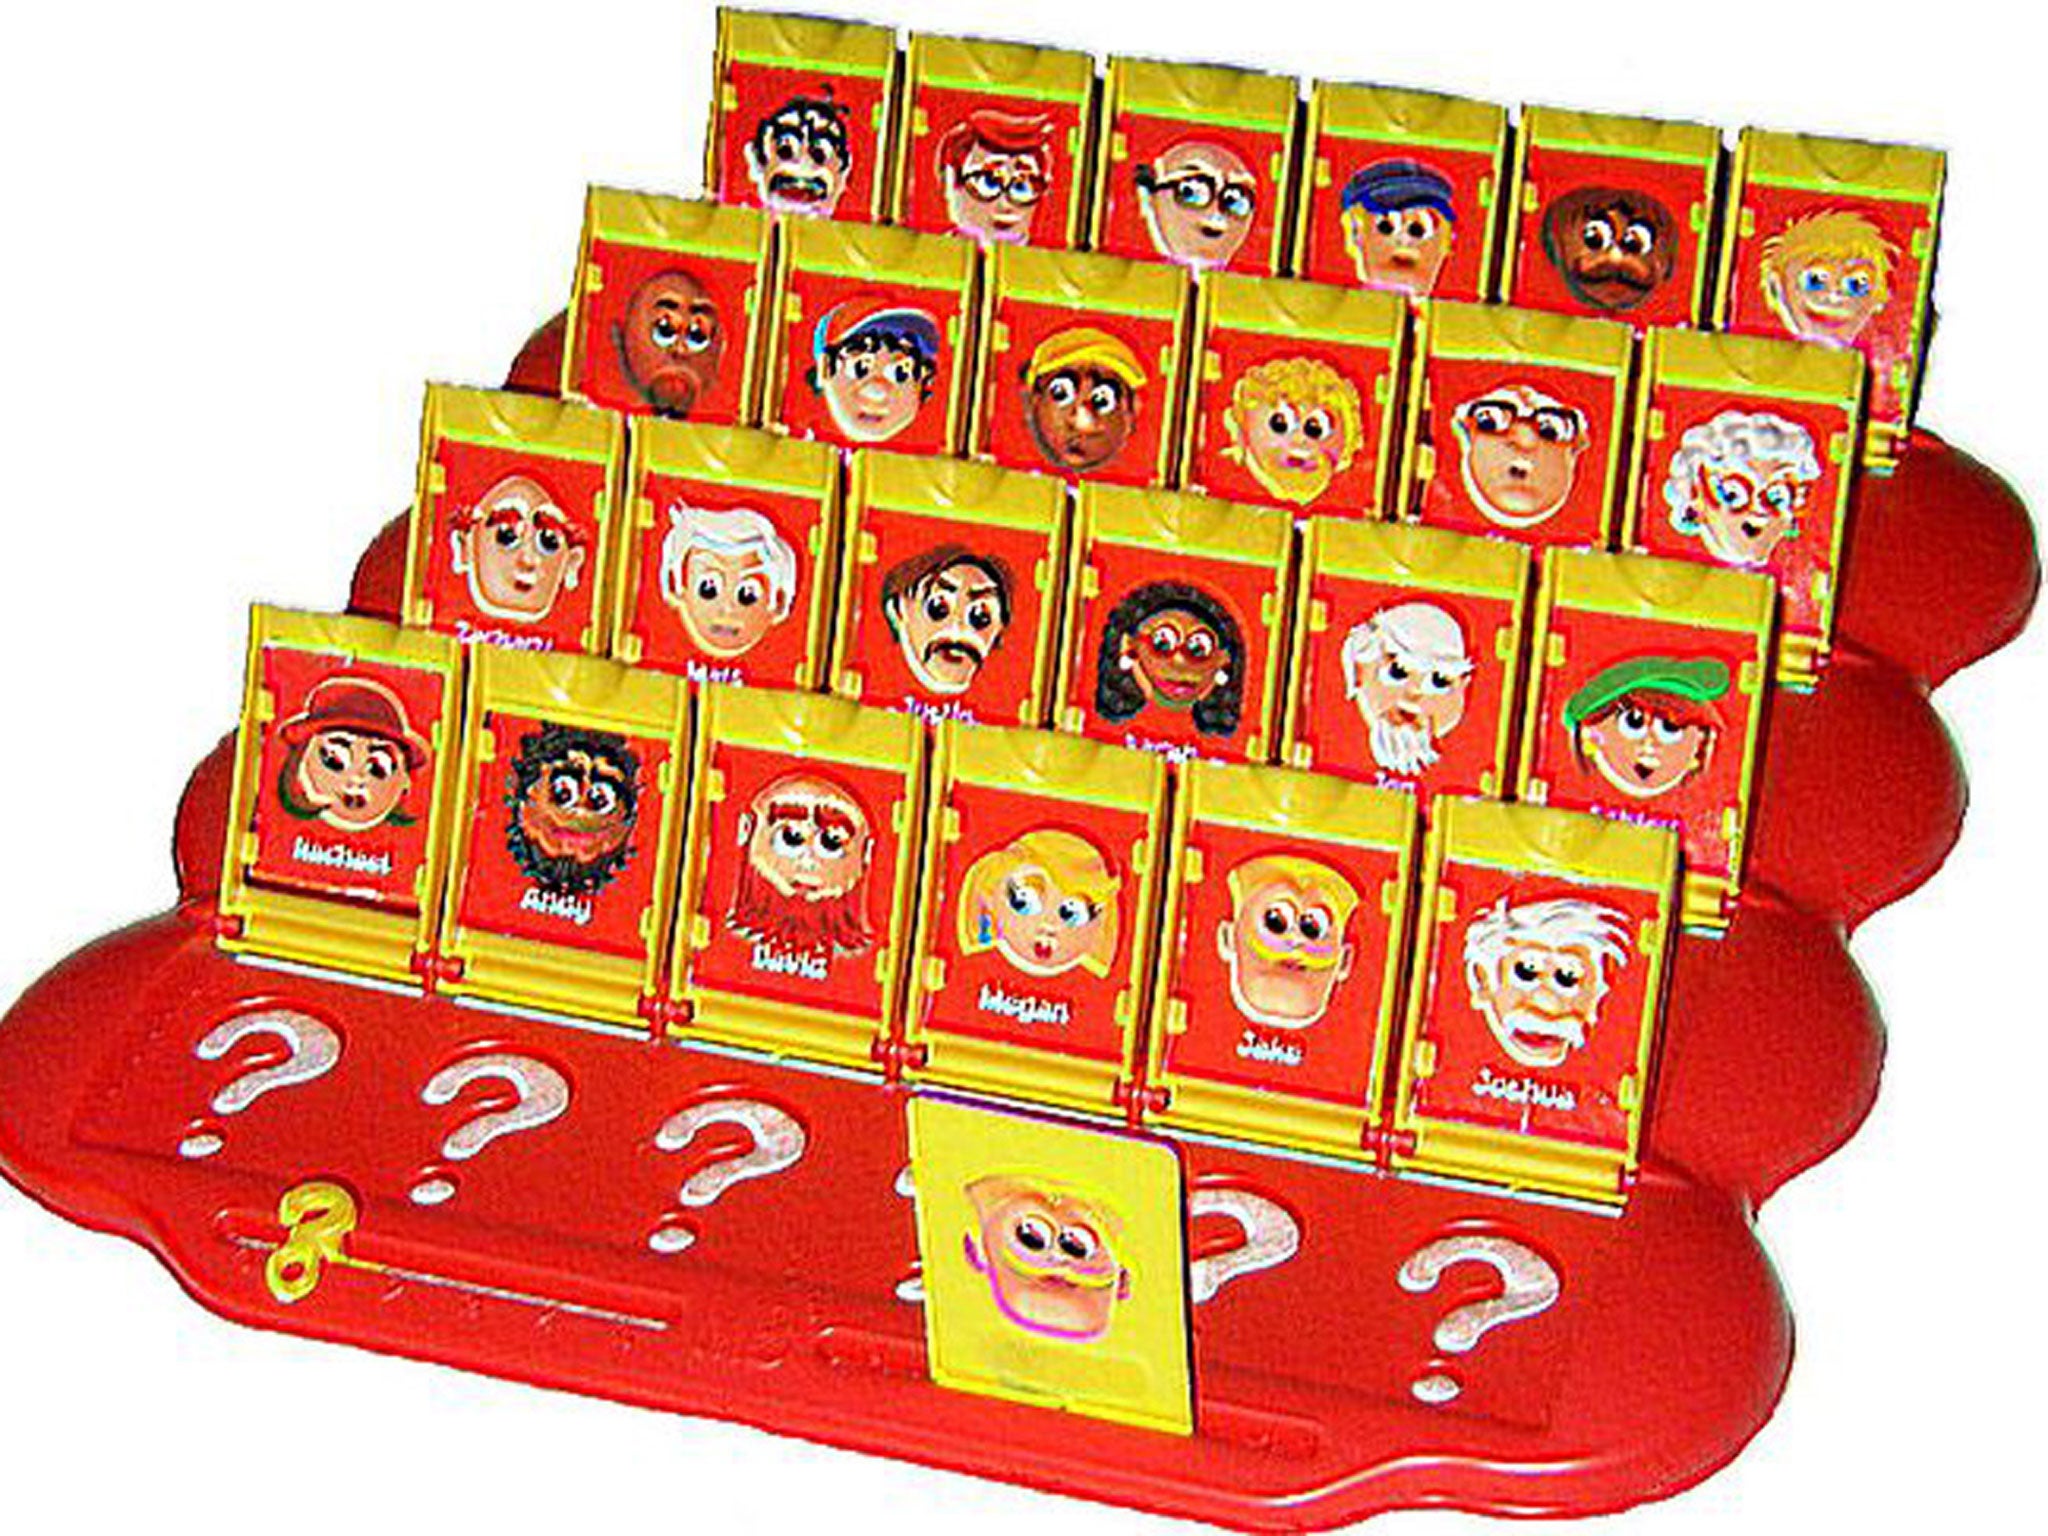 guess-who-s-sexist-classic-board-game-s-gender-bias-leaves-six-year